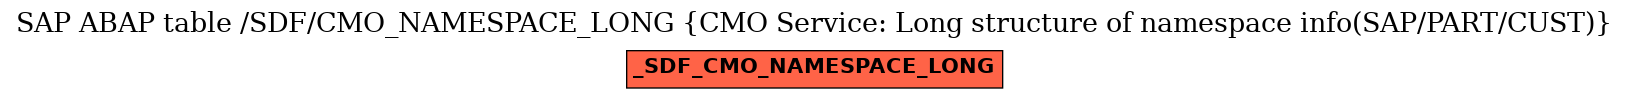 E-R Diagram for table /SDF/CMO_NAMESPACE_LONG (CMO Service: Long structure of namespace info(SAP/PART/CUST))